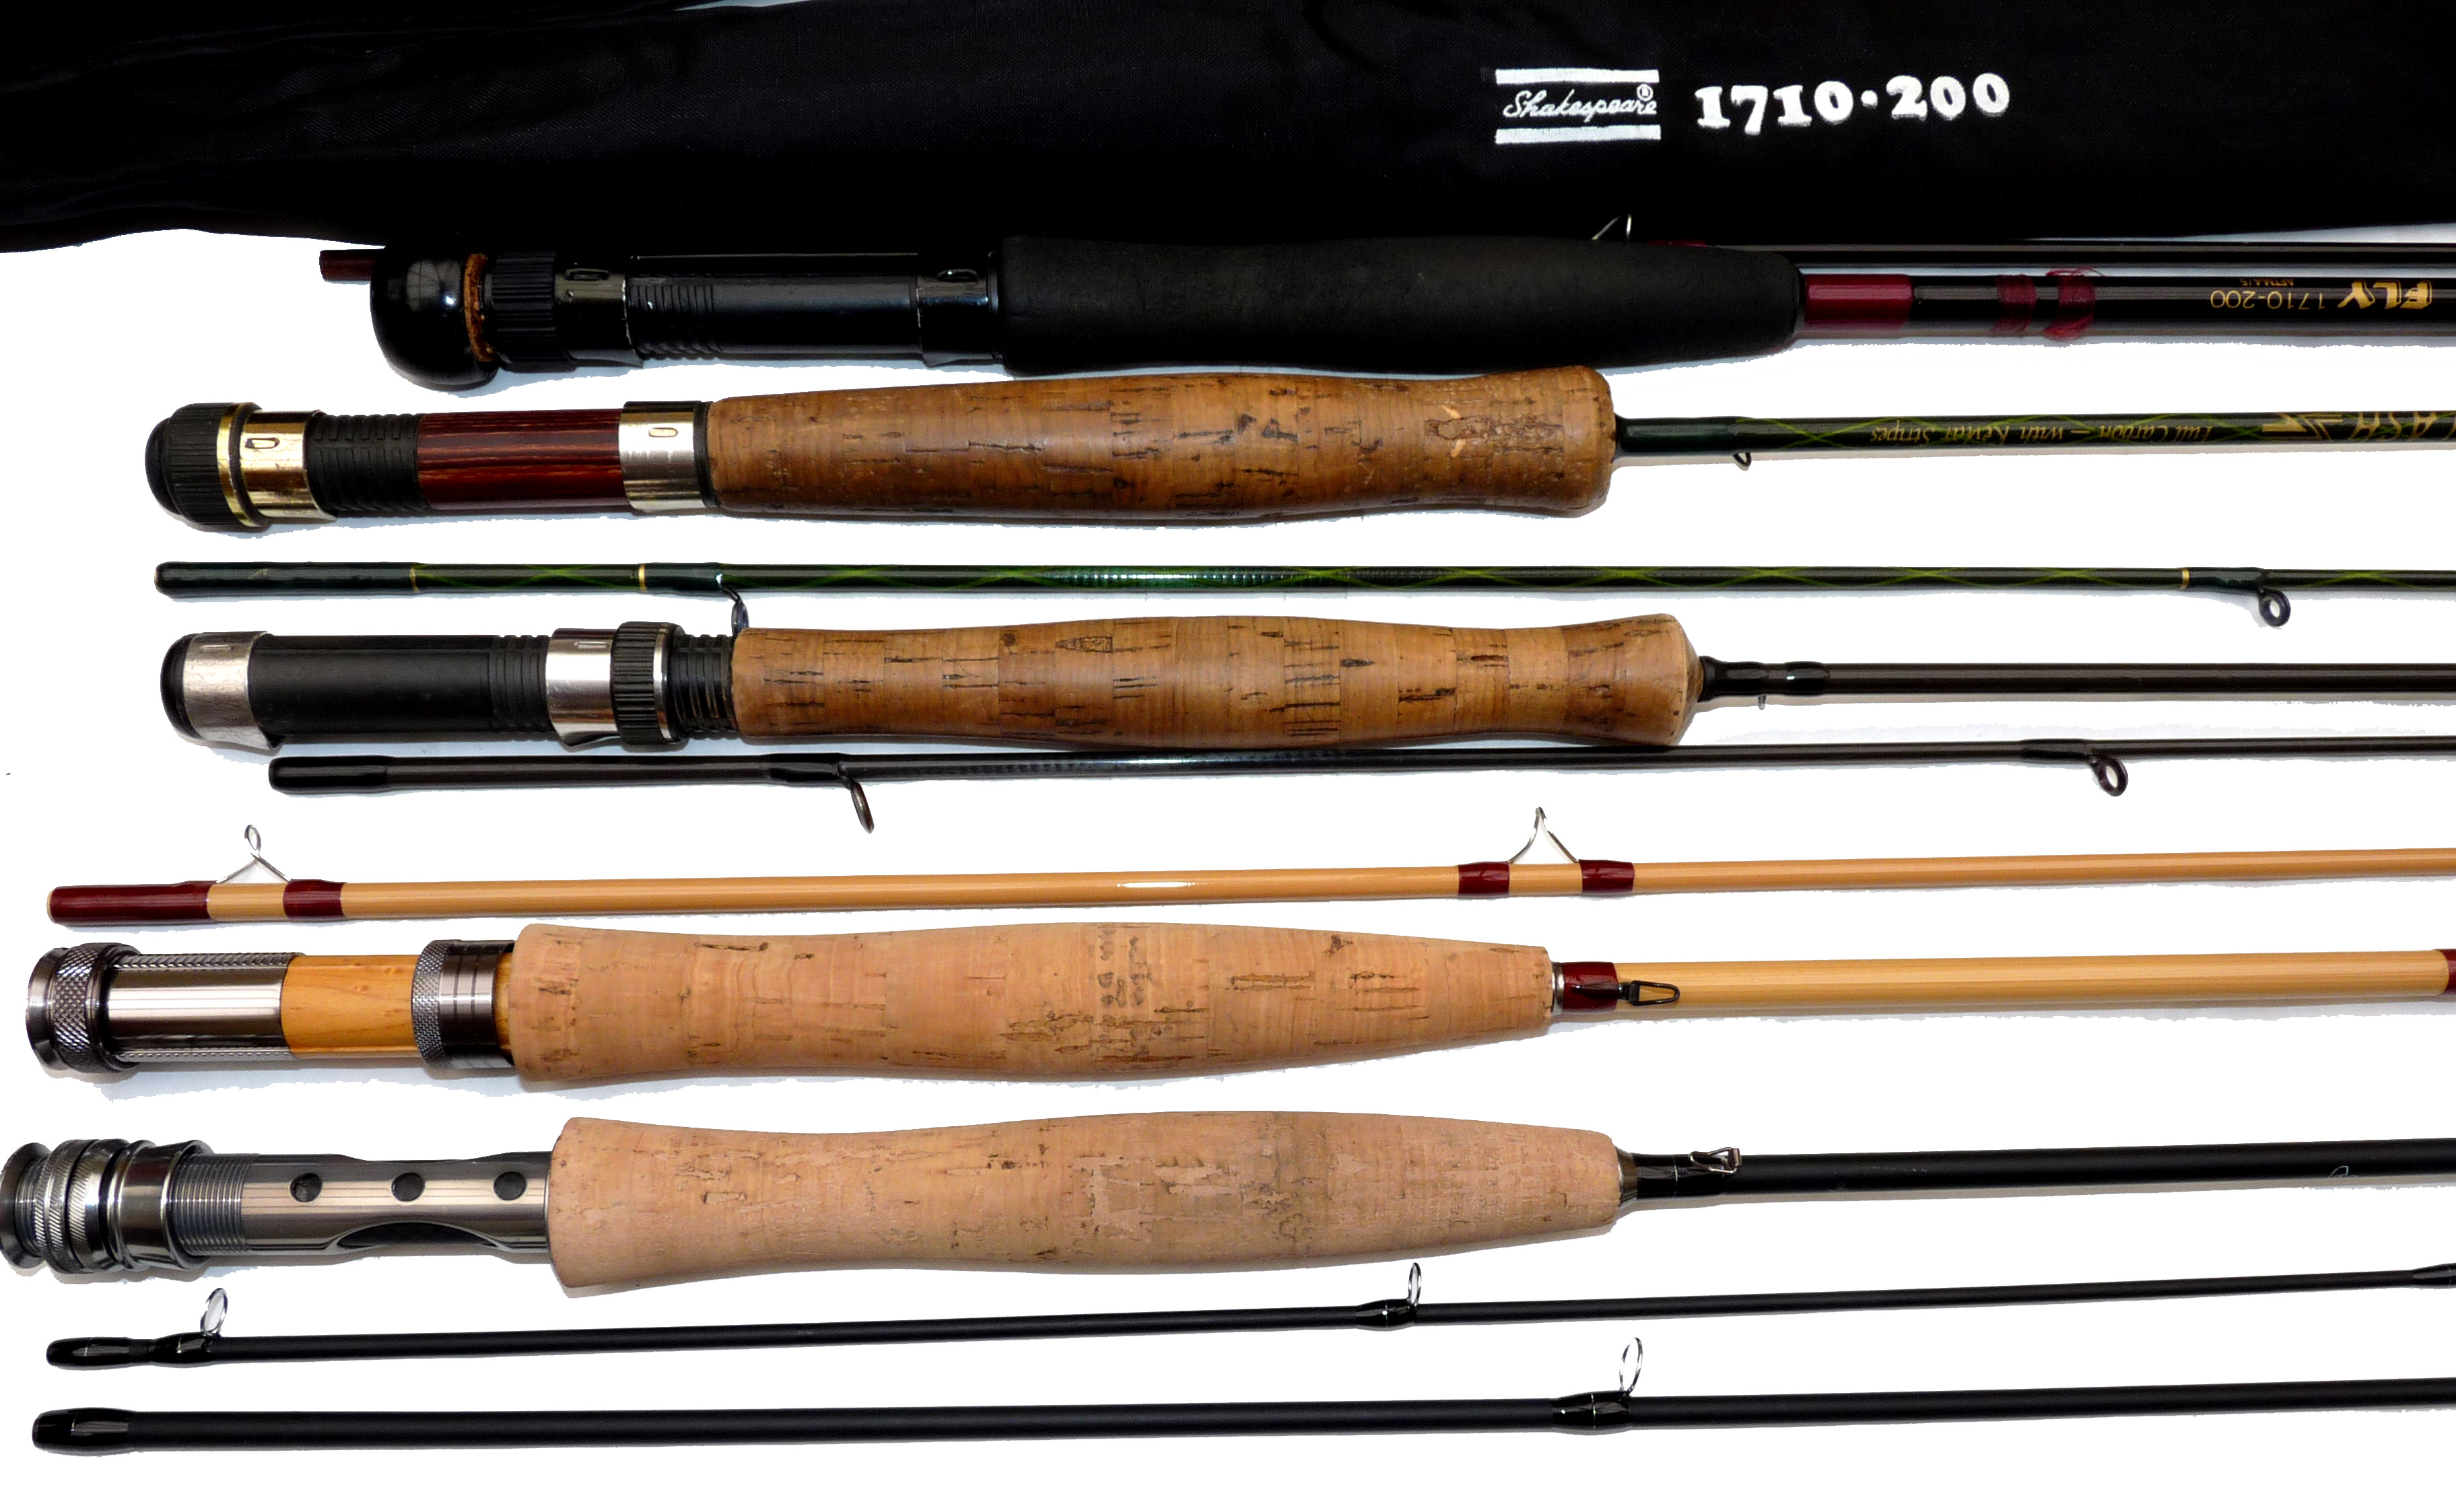 RODS (5): Five modern trout fly fishing rods, Shakespeare Purist Fly 9’ 2 pc in light cane finish,